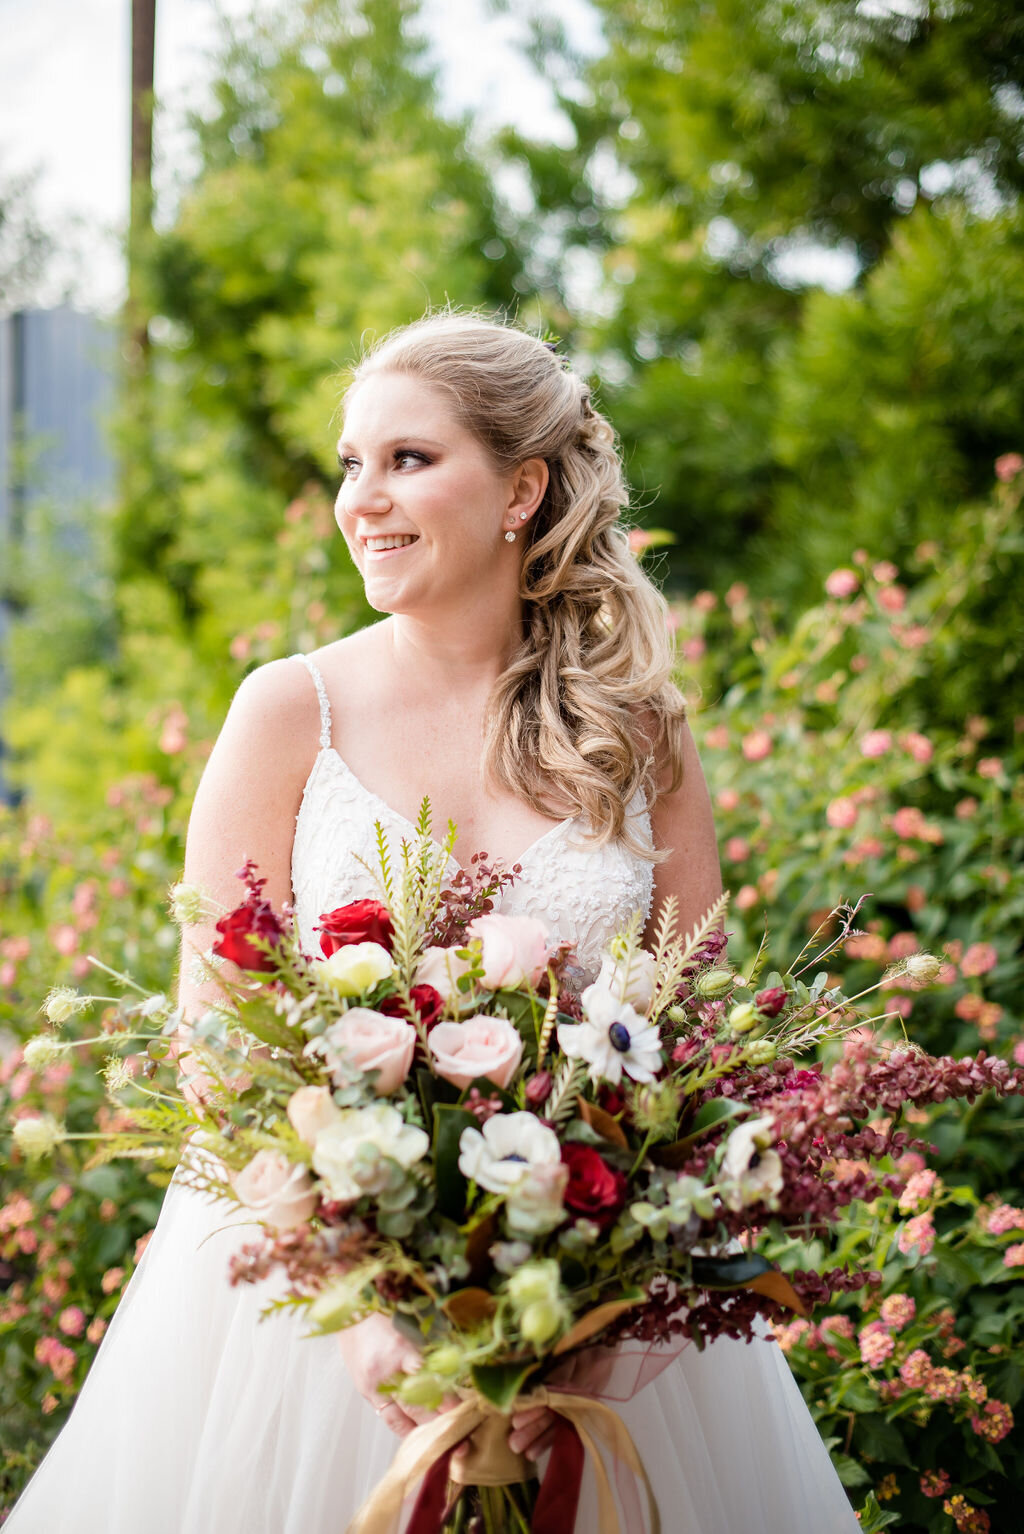 Blond hair blue eyed bride with purple smokey eye makeup and a soft pink blush and lip